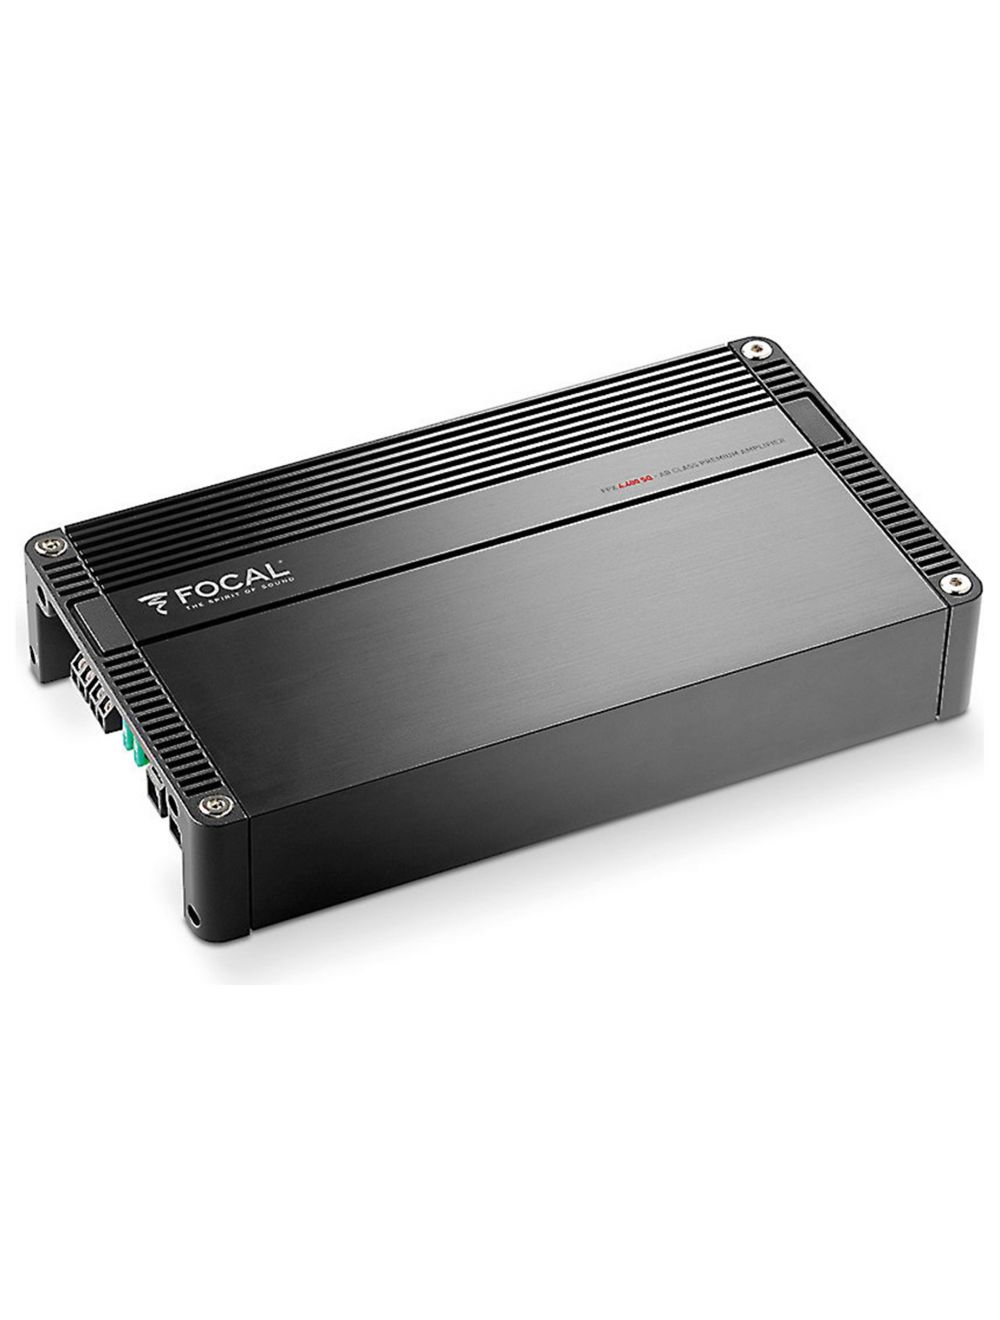 Focal FPX 4.400 SQ 4 Channel amplifier, 4 x 70 @ 4ohms, Class AB